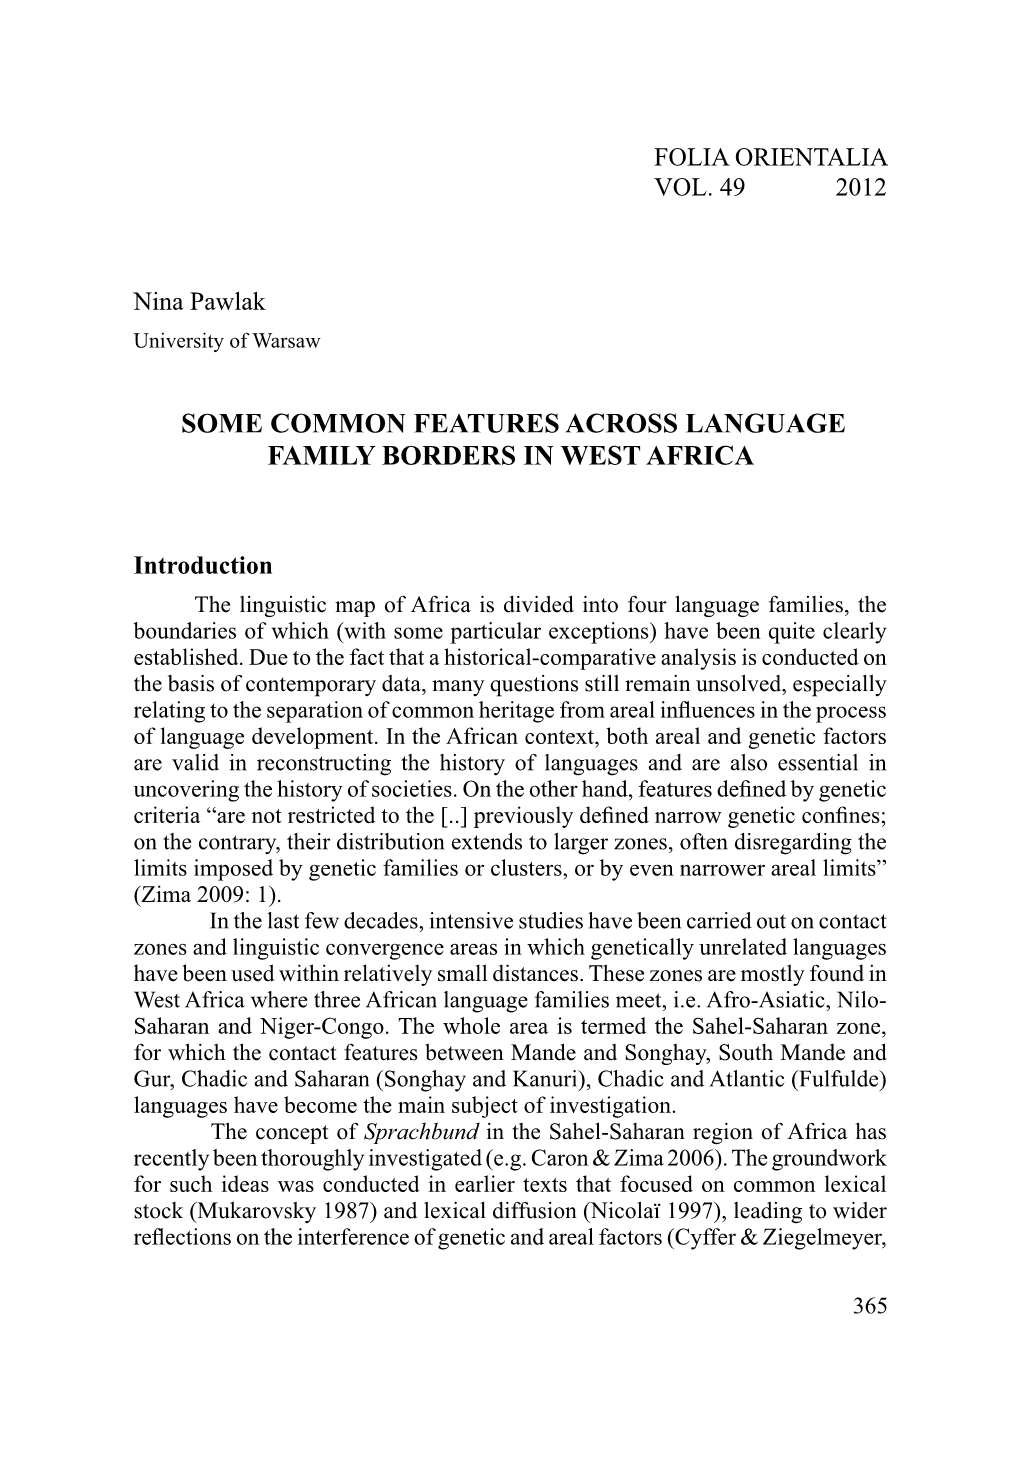 Some Common Features Across Language Family Borders in West Africa